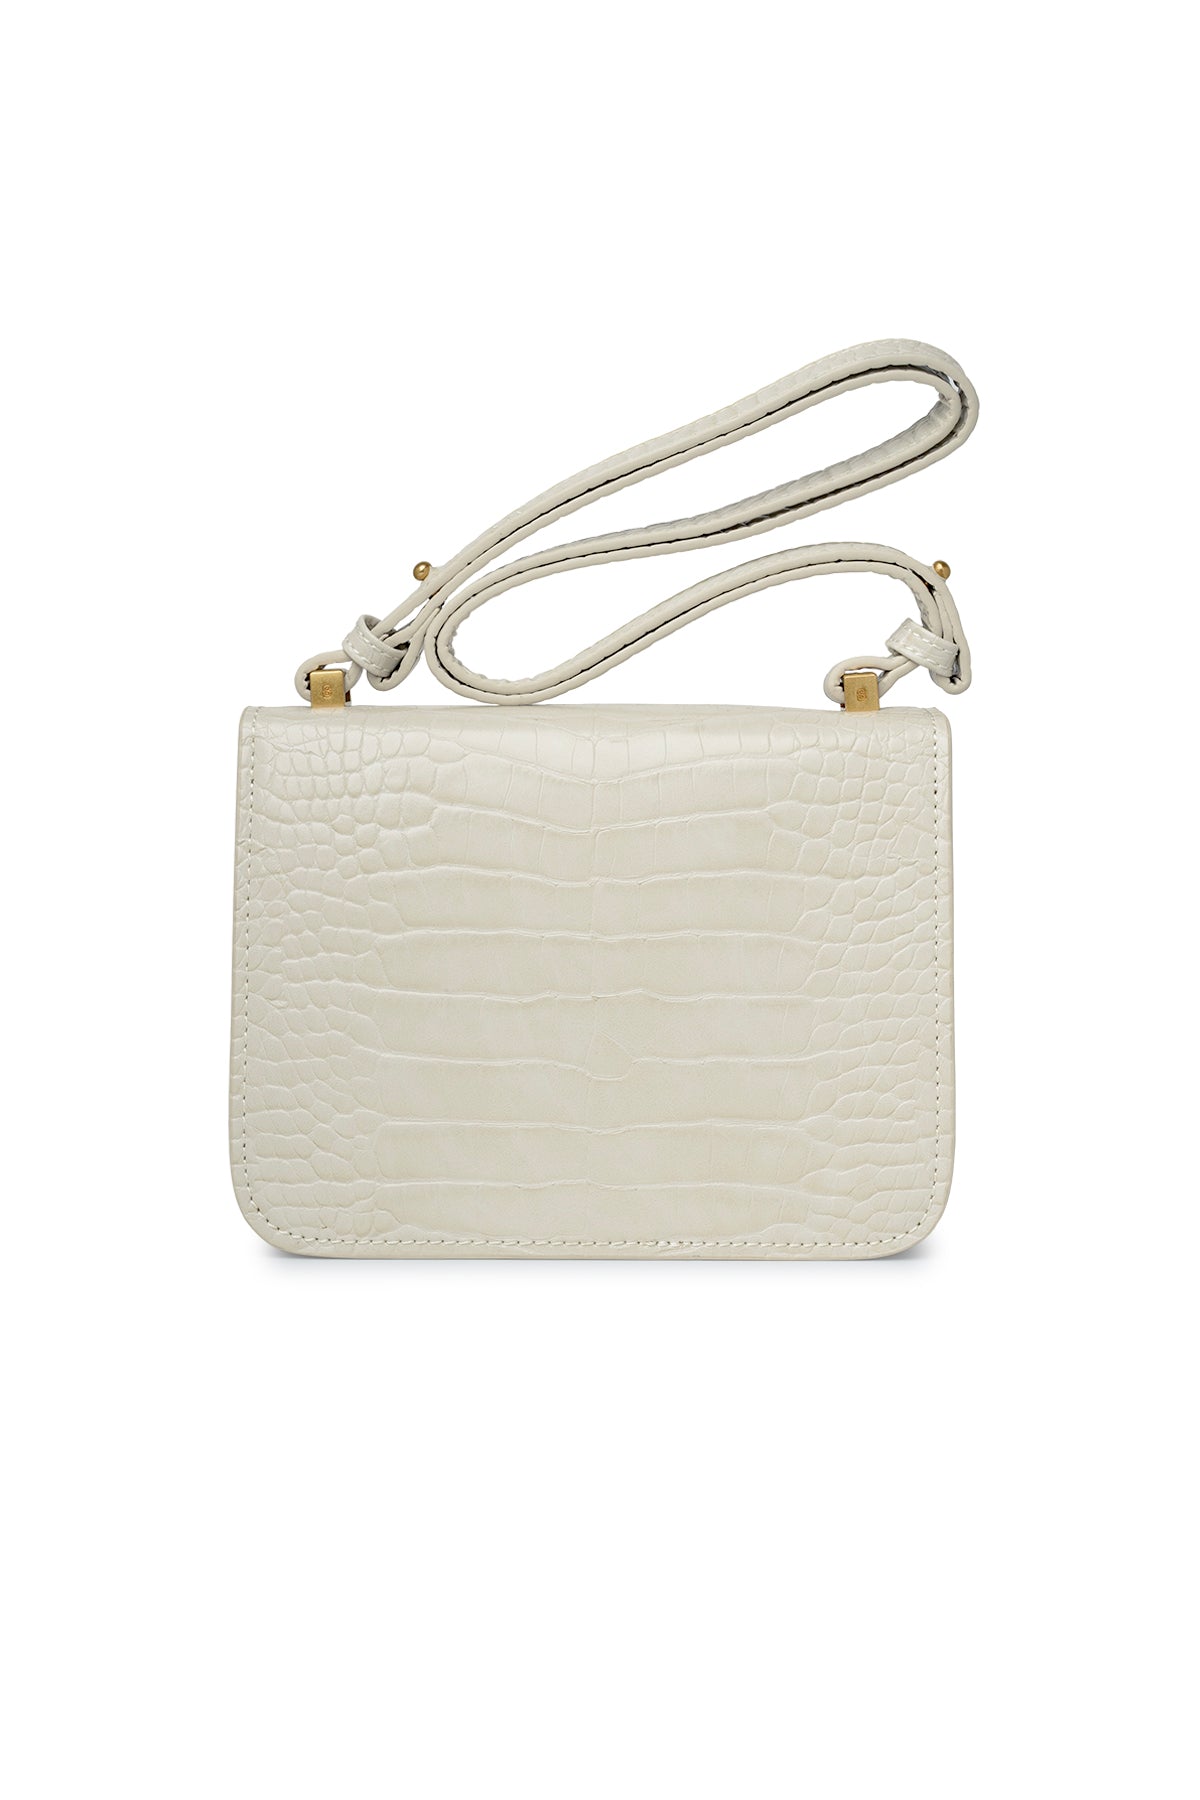 Audrey Bag 2.0 Small - Oyster